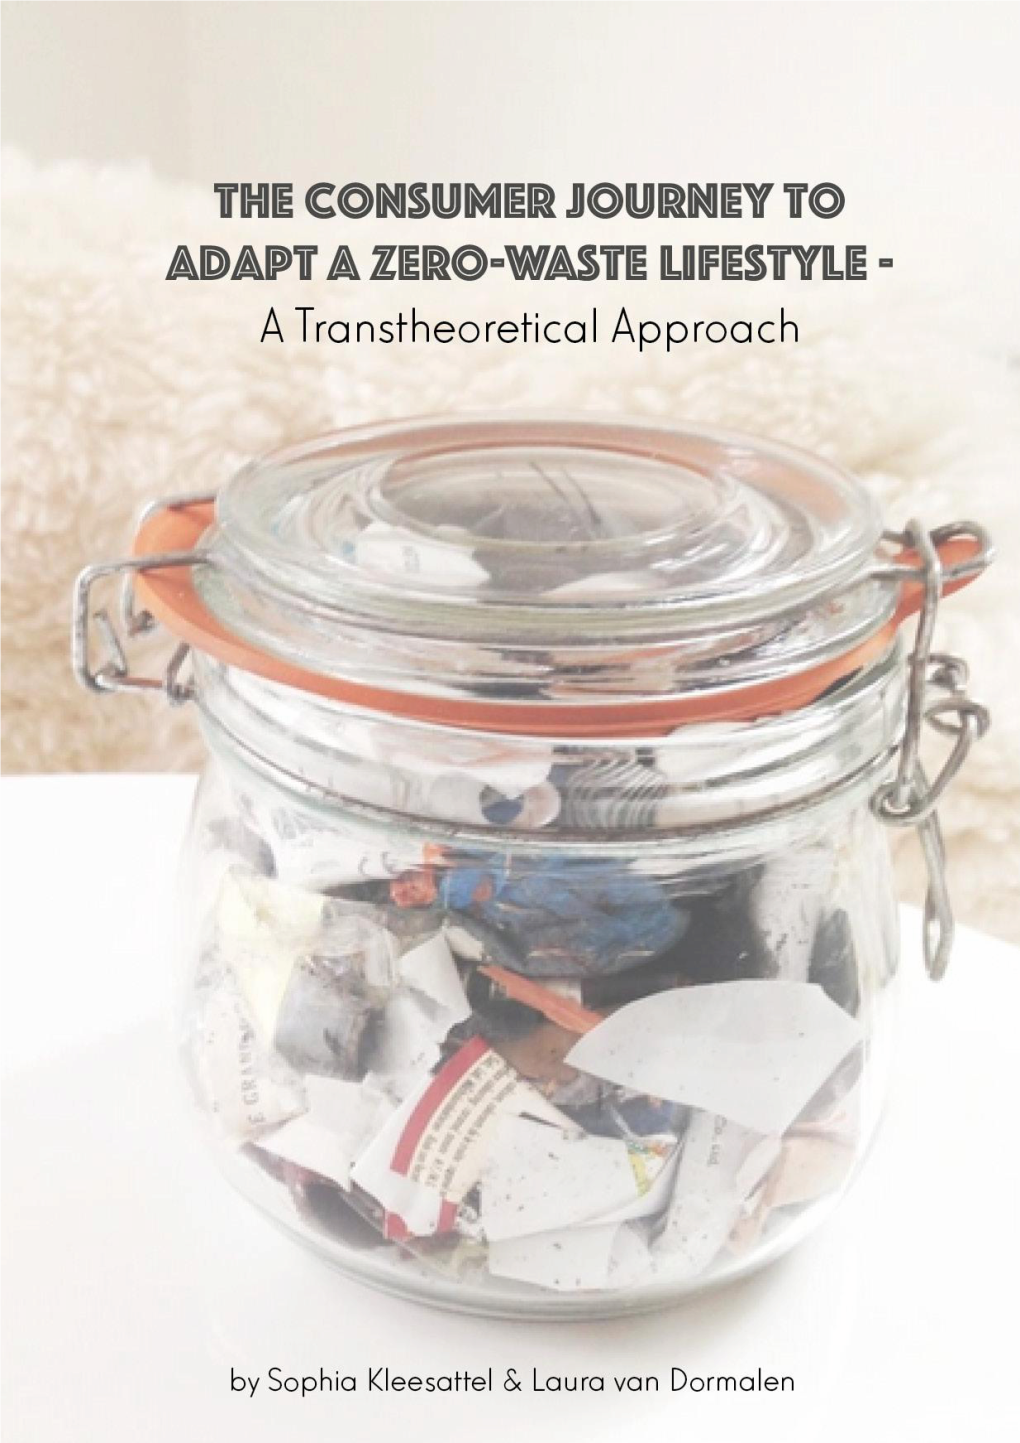 The Consumer Journey to Adapt a Zero-Waste Lifestyle